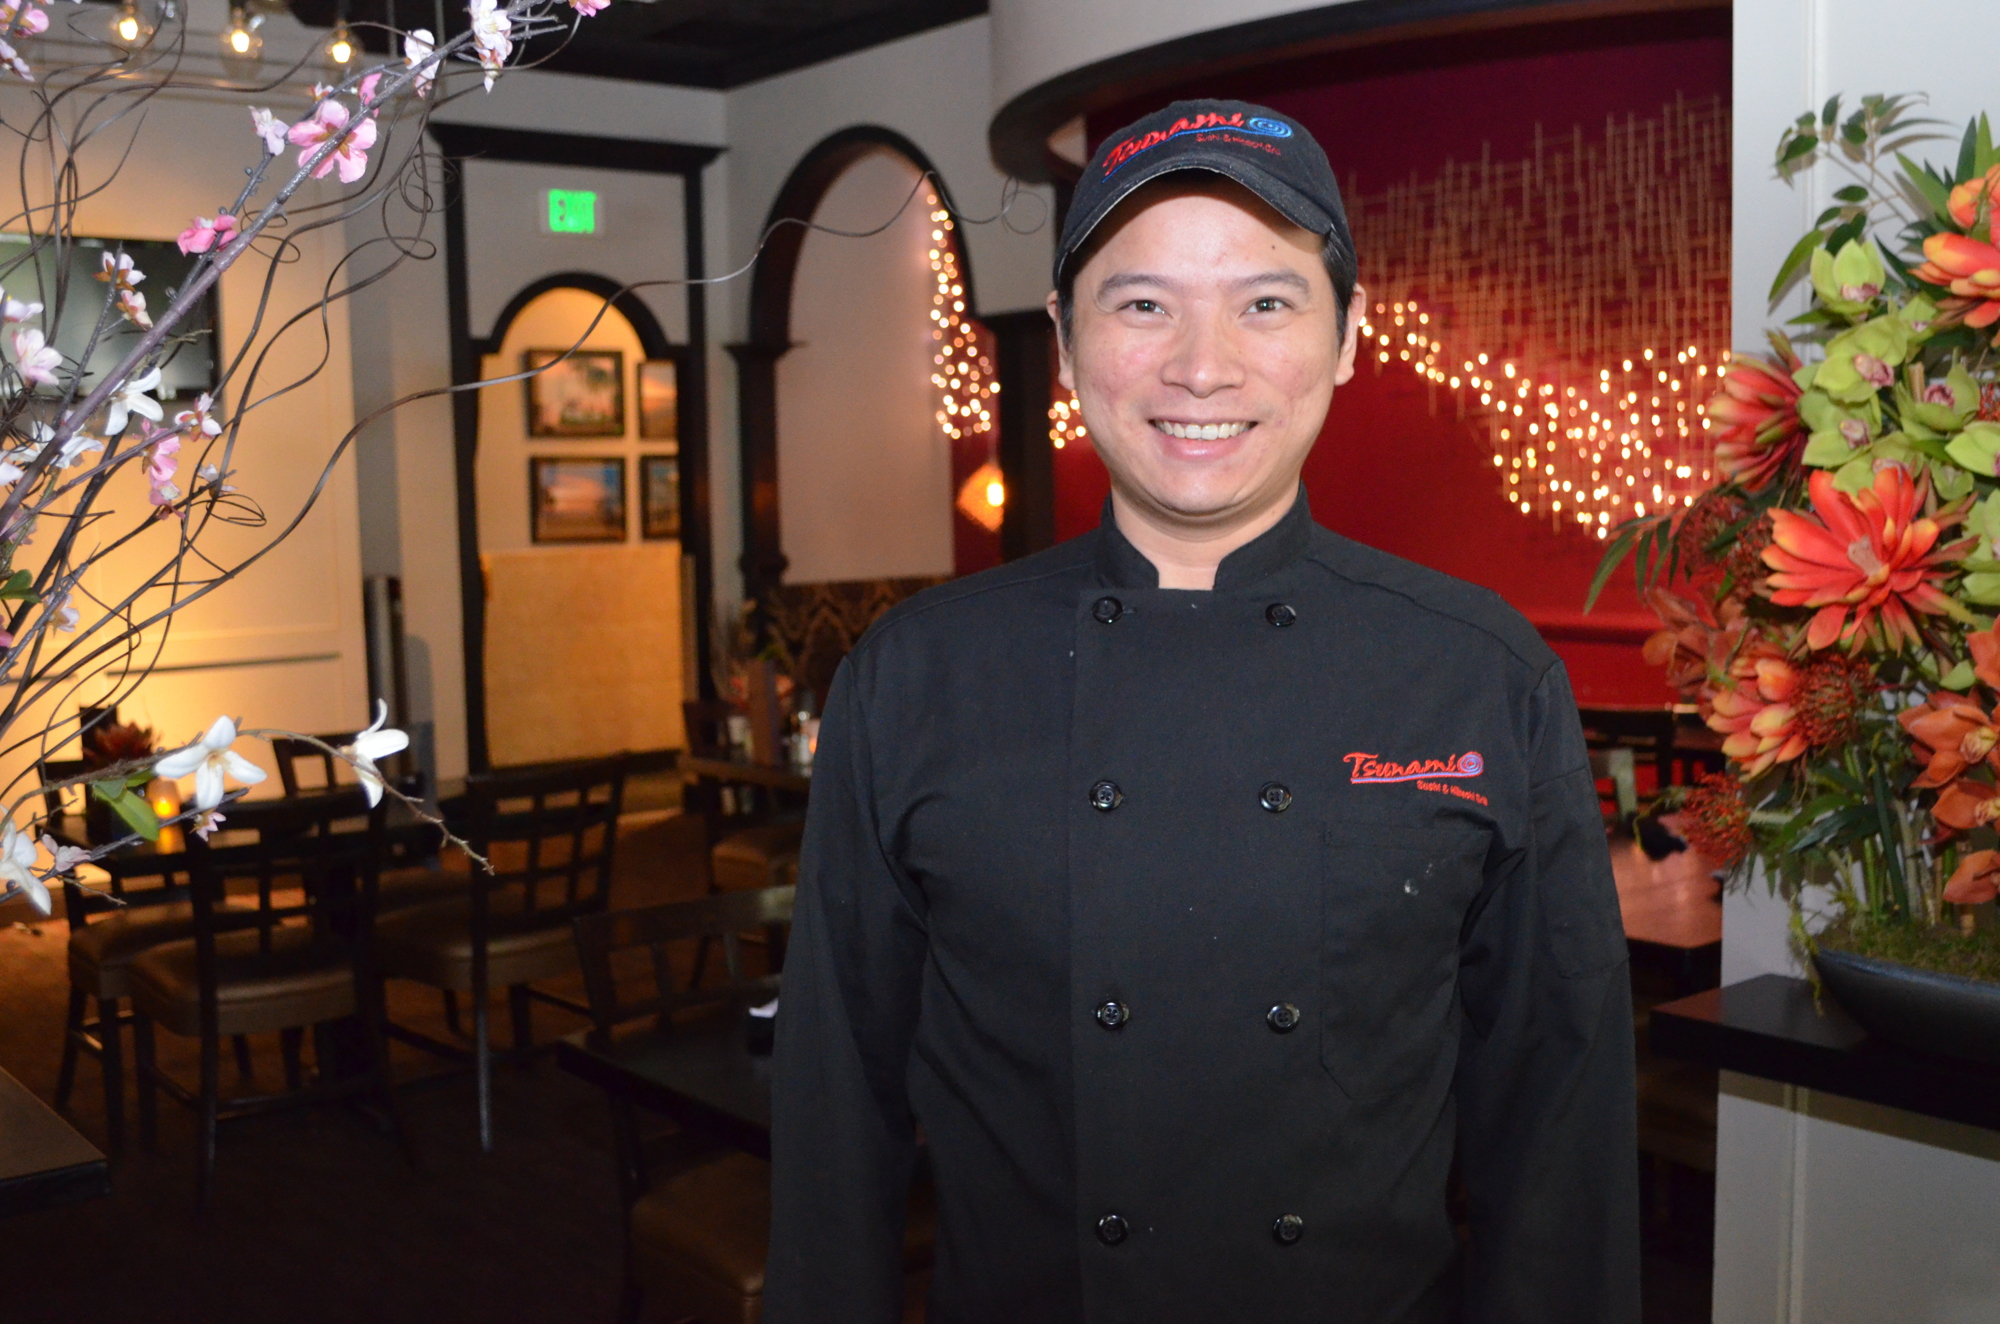 Tsunami Sushi & Hibachi Grill Executive Chef Allan Yu says he uses Taste of Downtown as a way of gauging his audience to decide what will work for upcoming menus. Photo by Niki Kottmann.